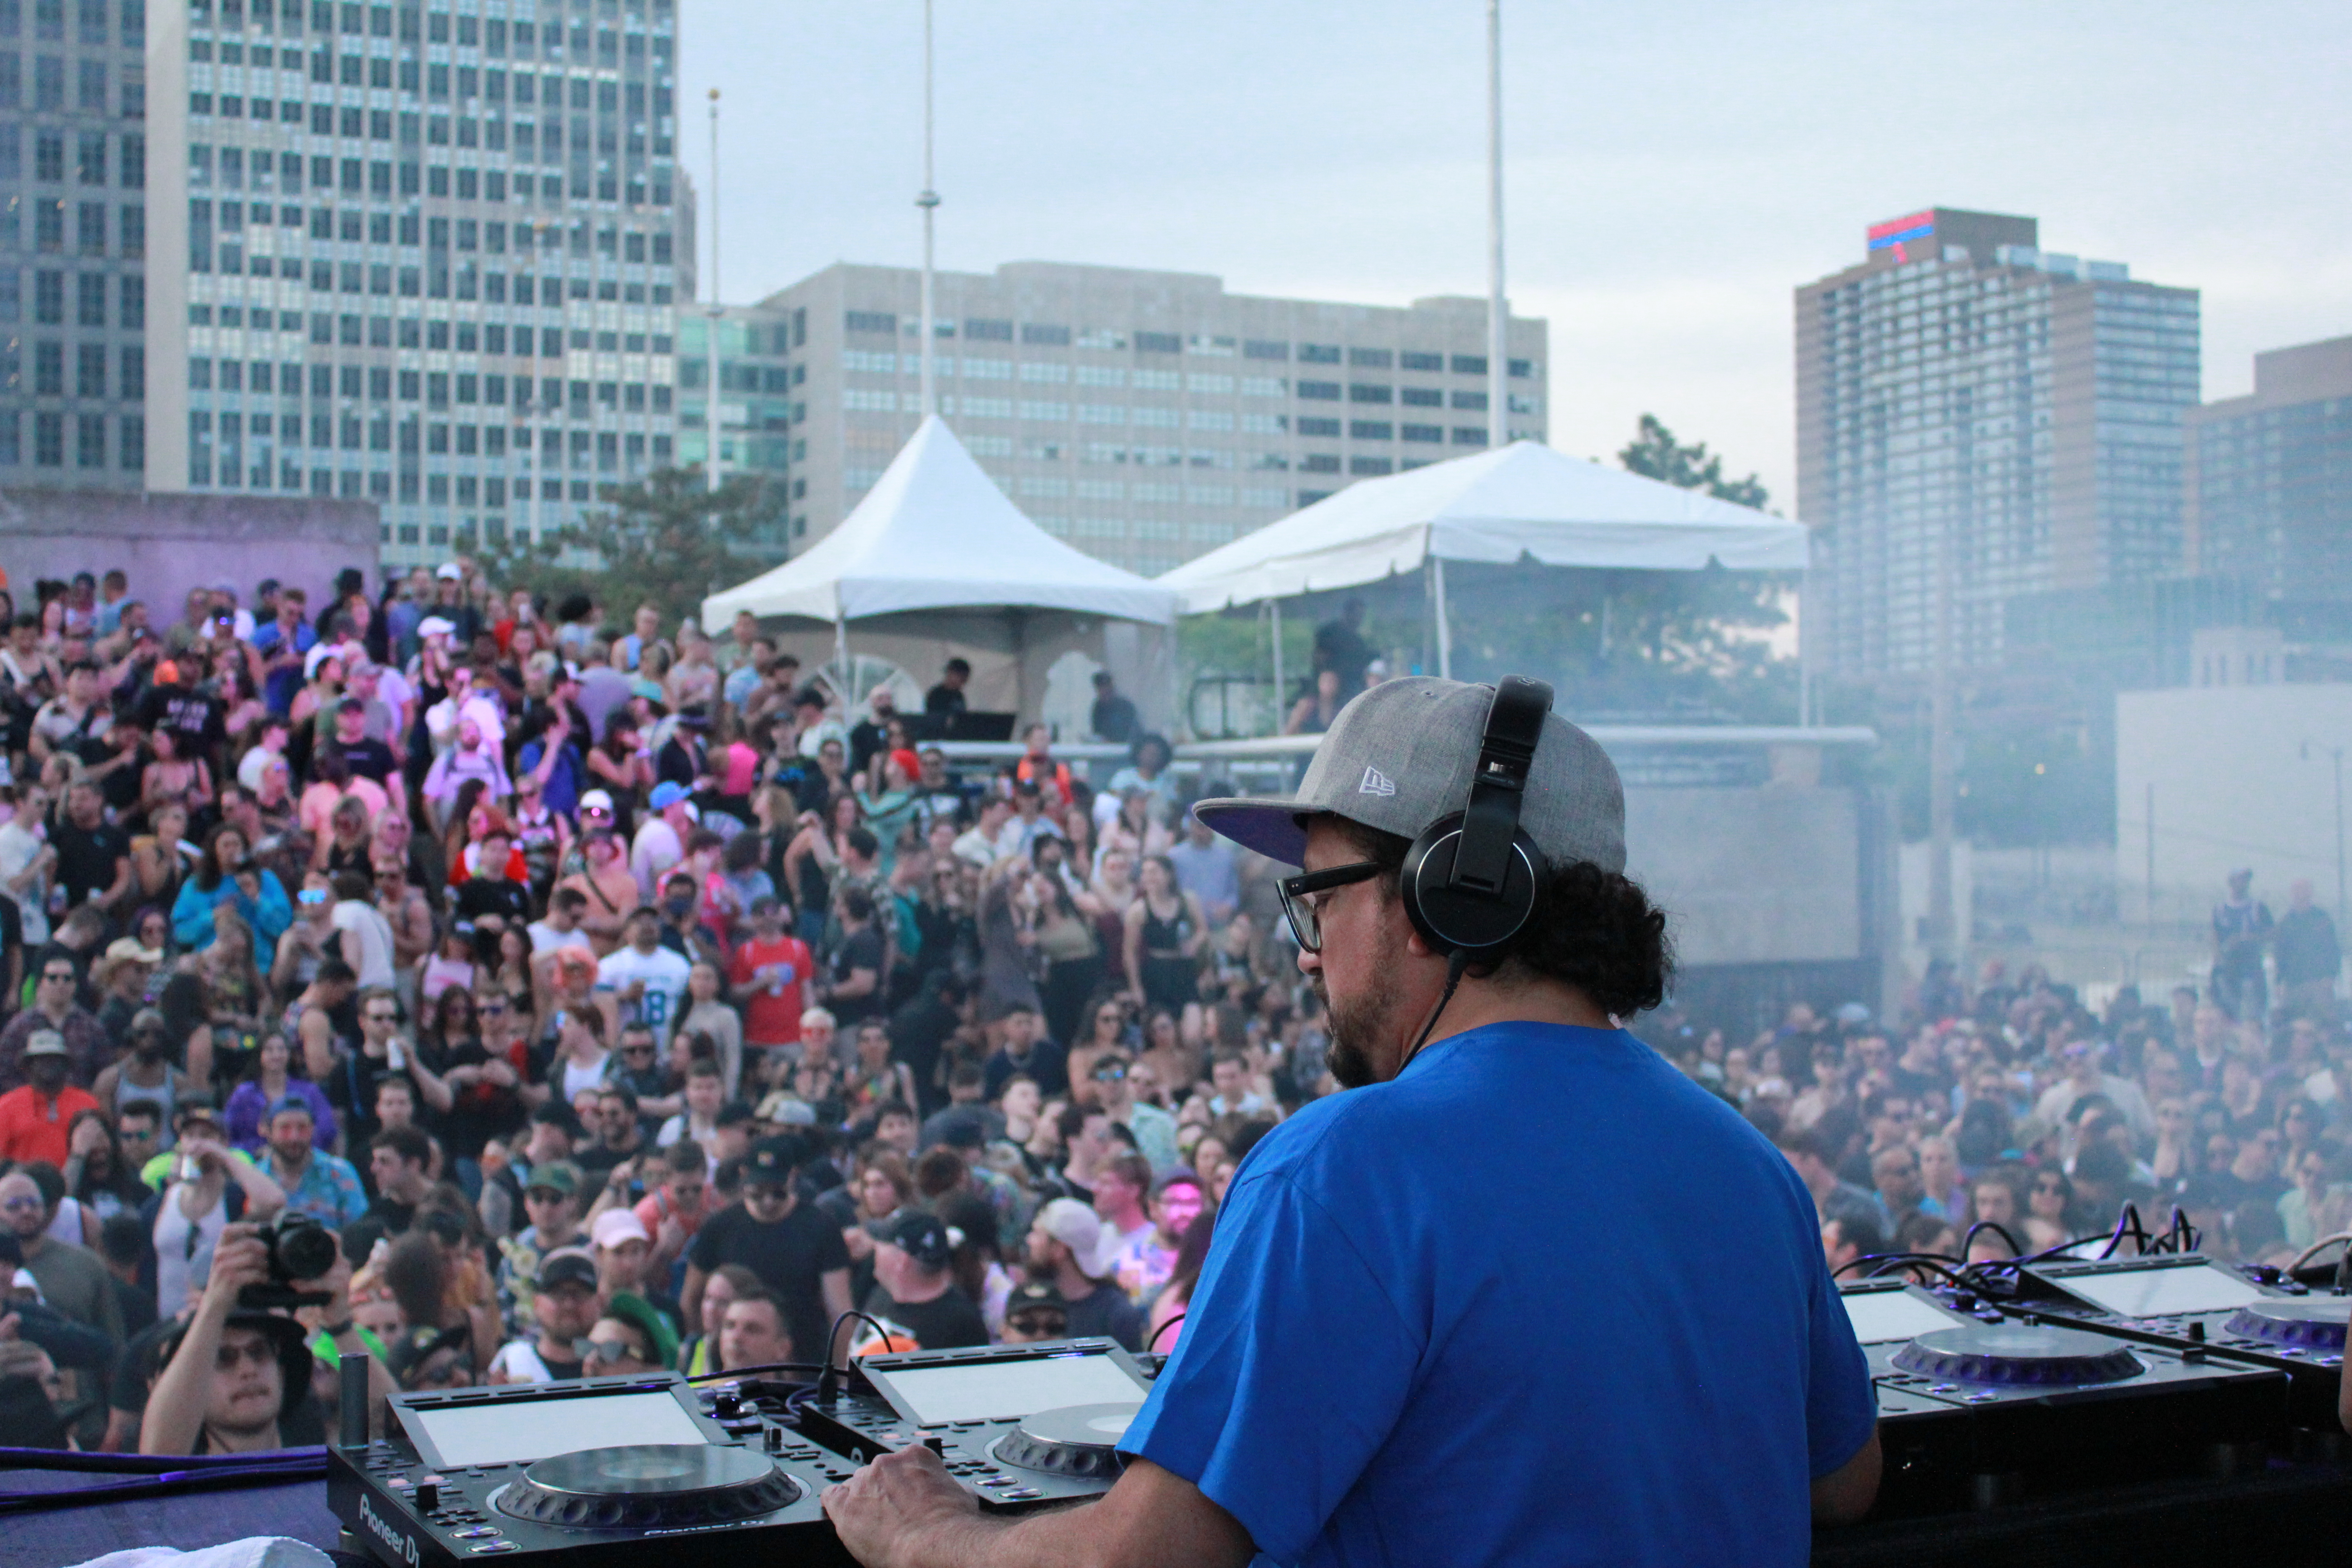 Mark Farina performing on stage at Movement 2023 electronic music festival in Detroit, MI, May 27, 2023. Photo by Christopher Namyst